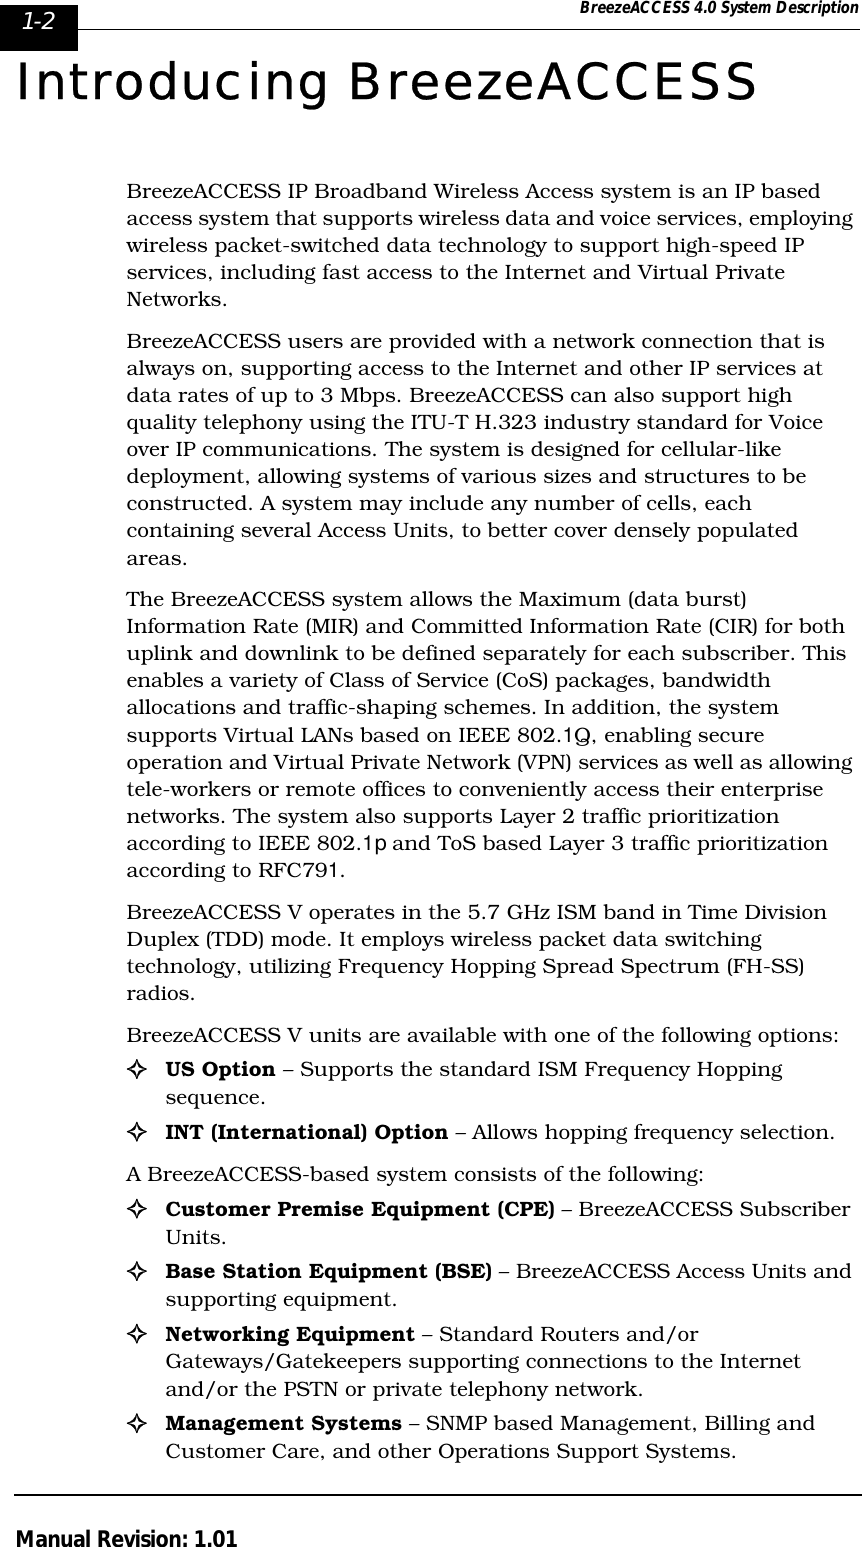 1-2 BreezeACCESS 4.0 System DescriptionManual Revision: 1.01Introducing BreezeACCESSBreezeACCESS IP Broadband Wireless Access system is an IP based access system that supports wireless data and voice services, employing wireless packet-switched data technology to support high-speed IP services, including fast access to the Internet and Virtual Private Networks.BreezeACCESS users are provided with a network connection that is always on, supporting access to the Internet and other IP services at data rates of up to 3 Mbps. BreezeACCESS can also support high quality telephony using the ITU-T H.323 industry standard for Voice over IP communications. The system is designed for cellular-like deployment, allowing systems of various sizes and structures to be constructed. A system may include any number of cells, each containing several Access Units, to better cover densely populated areas. The BreezeACCESS system allows the Maximum (data burst) Information Rate (MIR) and Committed Information Rate (CIR) for both uplink and downlink to be defined separately for each subscriber. This enables a variety of Class of Service (CoS) packages, bandwidth allocations and traffic-shaping schemes. In addition, the system supports Virtual LANs based on IEEE 802.1Q, enabling secure operation and Virtual Private Network (VPN) services as well as allowing tele-workers or remote offices to conveniently access their enterprise networks. The system also supports Layer 2 traffic prioritization according to IEEE 802.1p and ToS based Layer 3 traffic prioritization according to RFC791.BreezeACCESS V operates in the 5.7 GHz ISM band in Time Division Duplex (TDD) mode. It employs wireless packet data switching technology, utilizing Frequency Hopping Spread Spectrum (FH-SS) radios. BreezeACCESS V units are available with one of the following options:!US Option – Supports the standard ISM Frequency Hopping sequence.!INT (International) Option – Allows hopping frequency selection.A BreezeACCESS-based system consists of the following:!Customer Premise Equipment (CPE) – BreezeACCESS Subscriber Units.!Base Station Equipment (BSE) – BreezeACCESS Access Units and supporting equipment.!Networking Equipment – Standard Routers and/or Gateways/Gatekeepers supporting connections to the Internet and/or the PSTN or private telephony network. !Management Systems – SNMP based Management, Billing and Customer Care, and other Operations Support Systems.